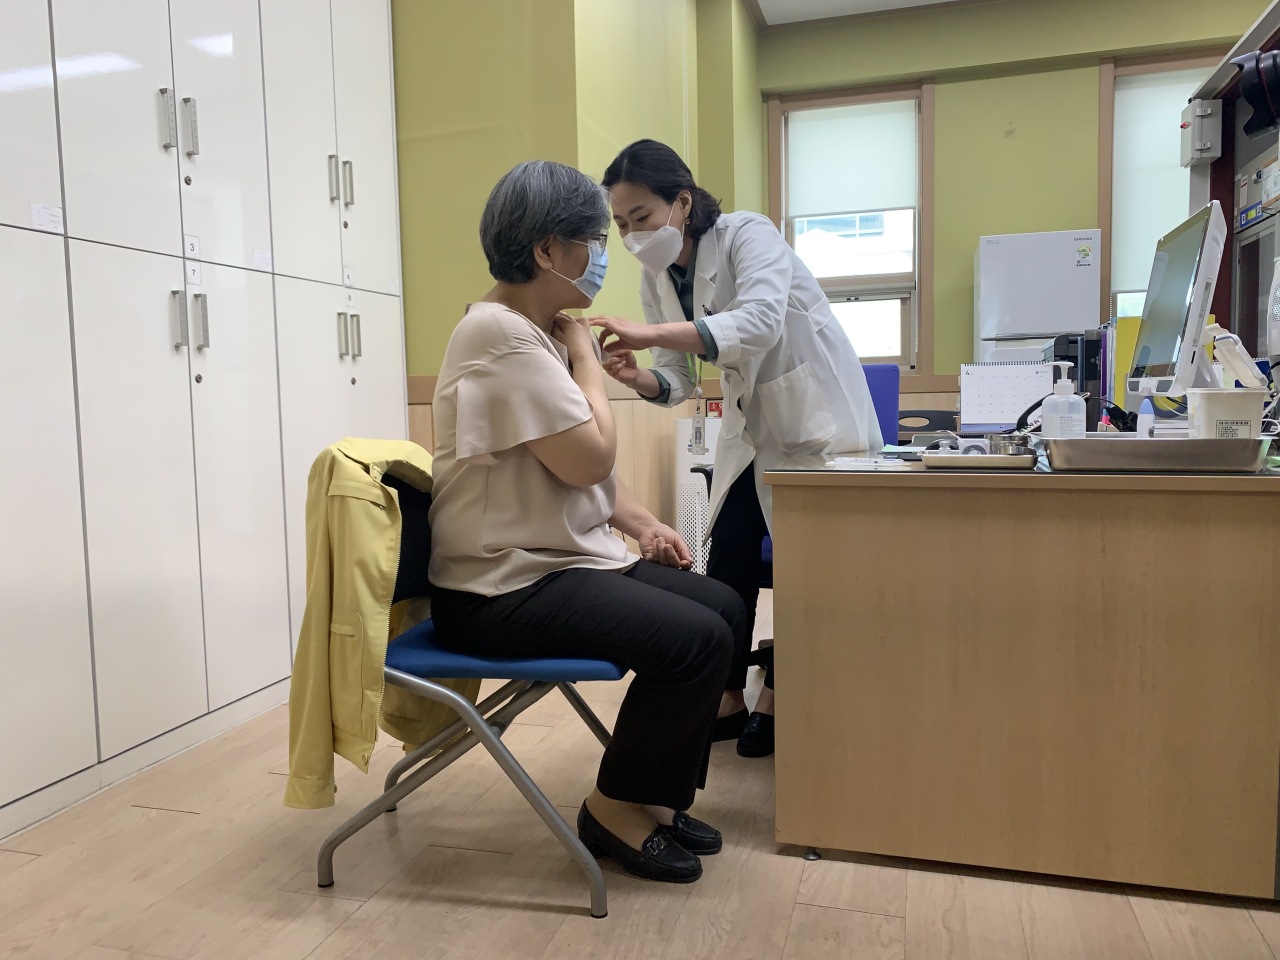 KDCA Commissioner Jeong Eun-kyeong receives her first dose of AstraZeneca’s COVID-19 vaccine Thursday morning at a public health center in Cheongju, North Chungcheong Province. (Kim Arin/The Korea Herald)